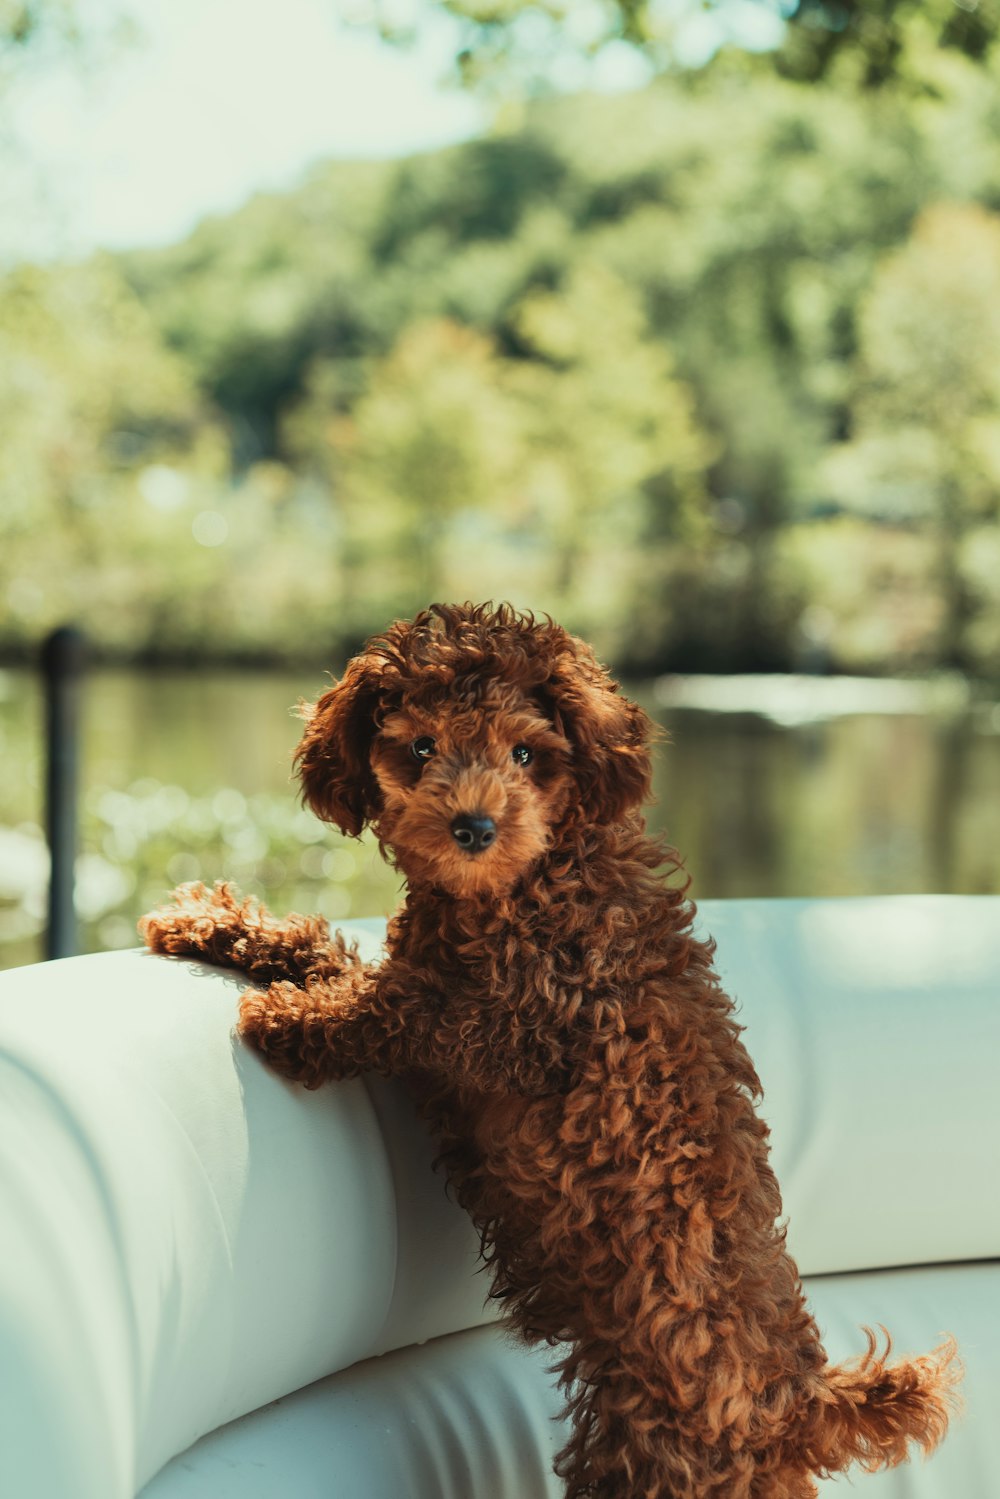 brown curly coated small dog photo – Free Maine Image on Unsplash